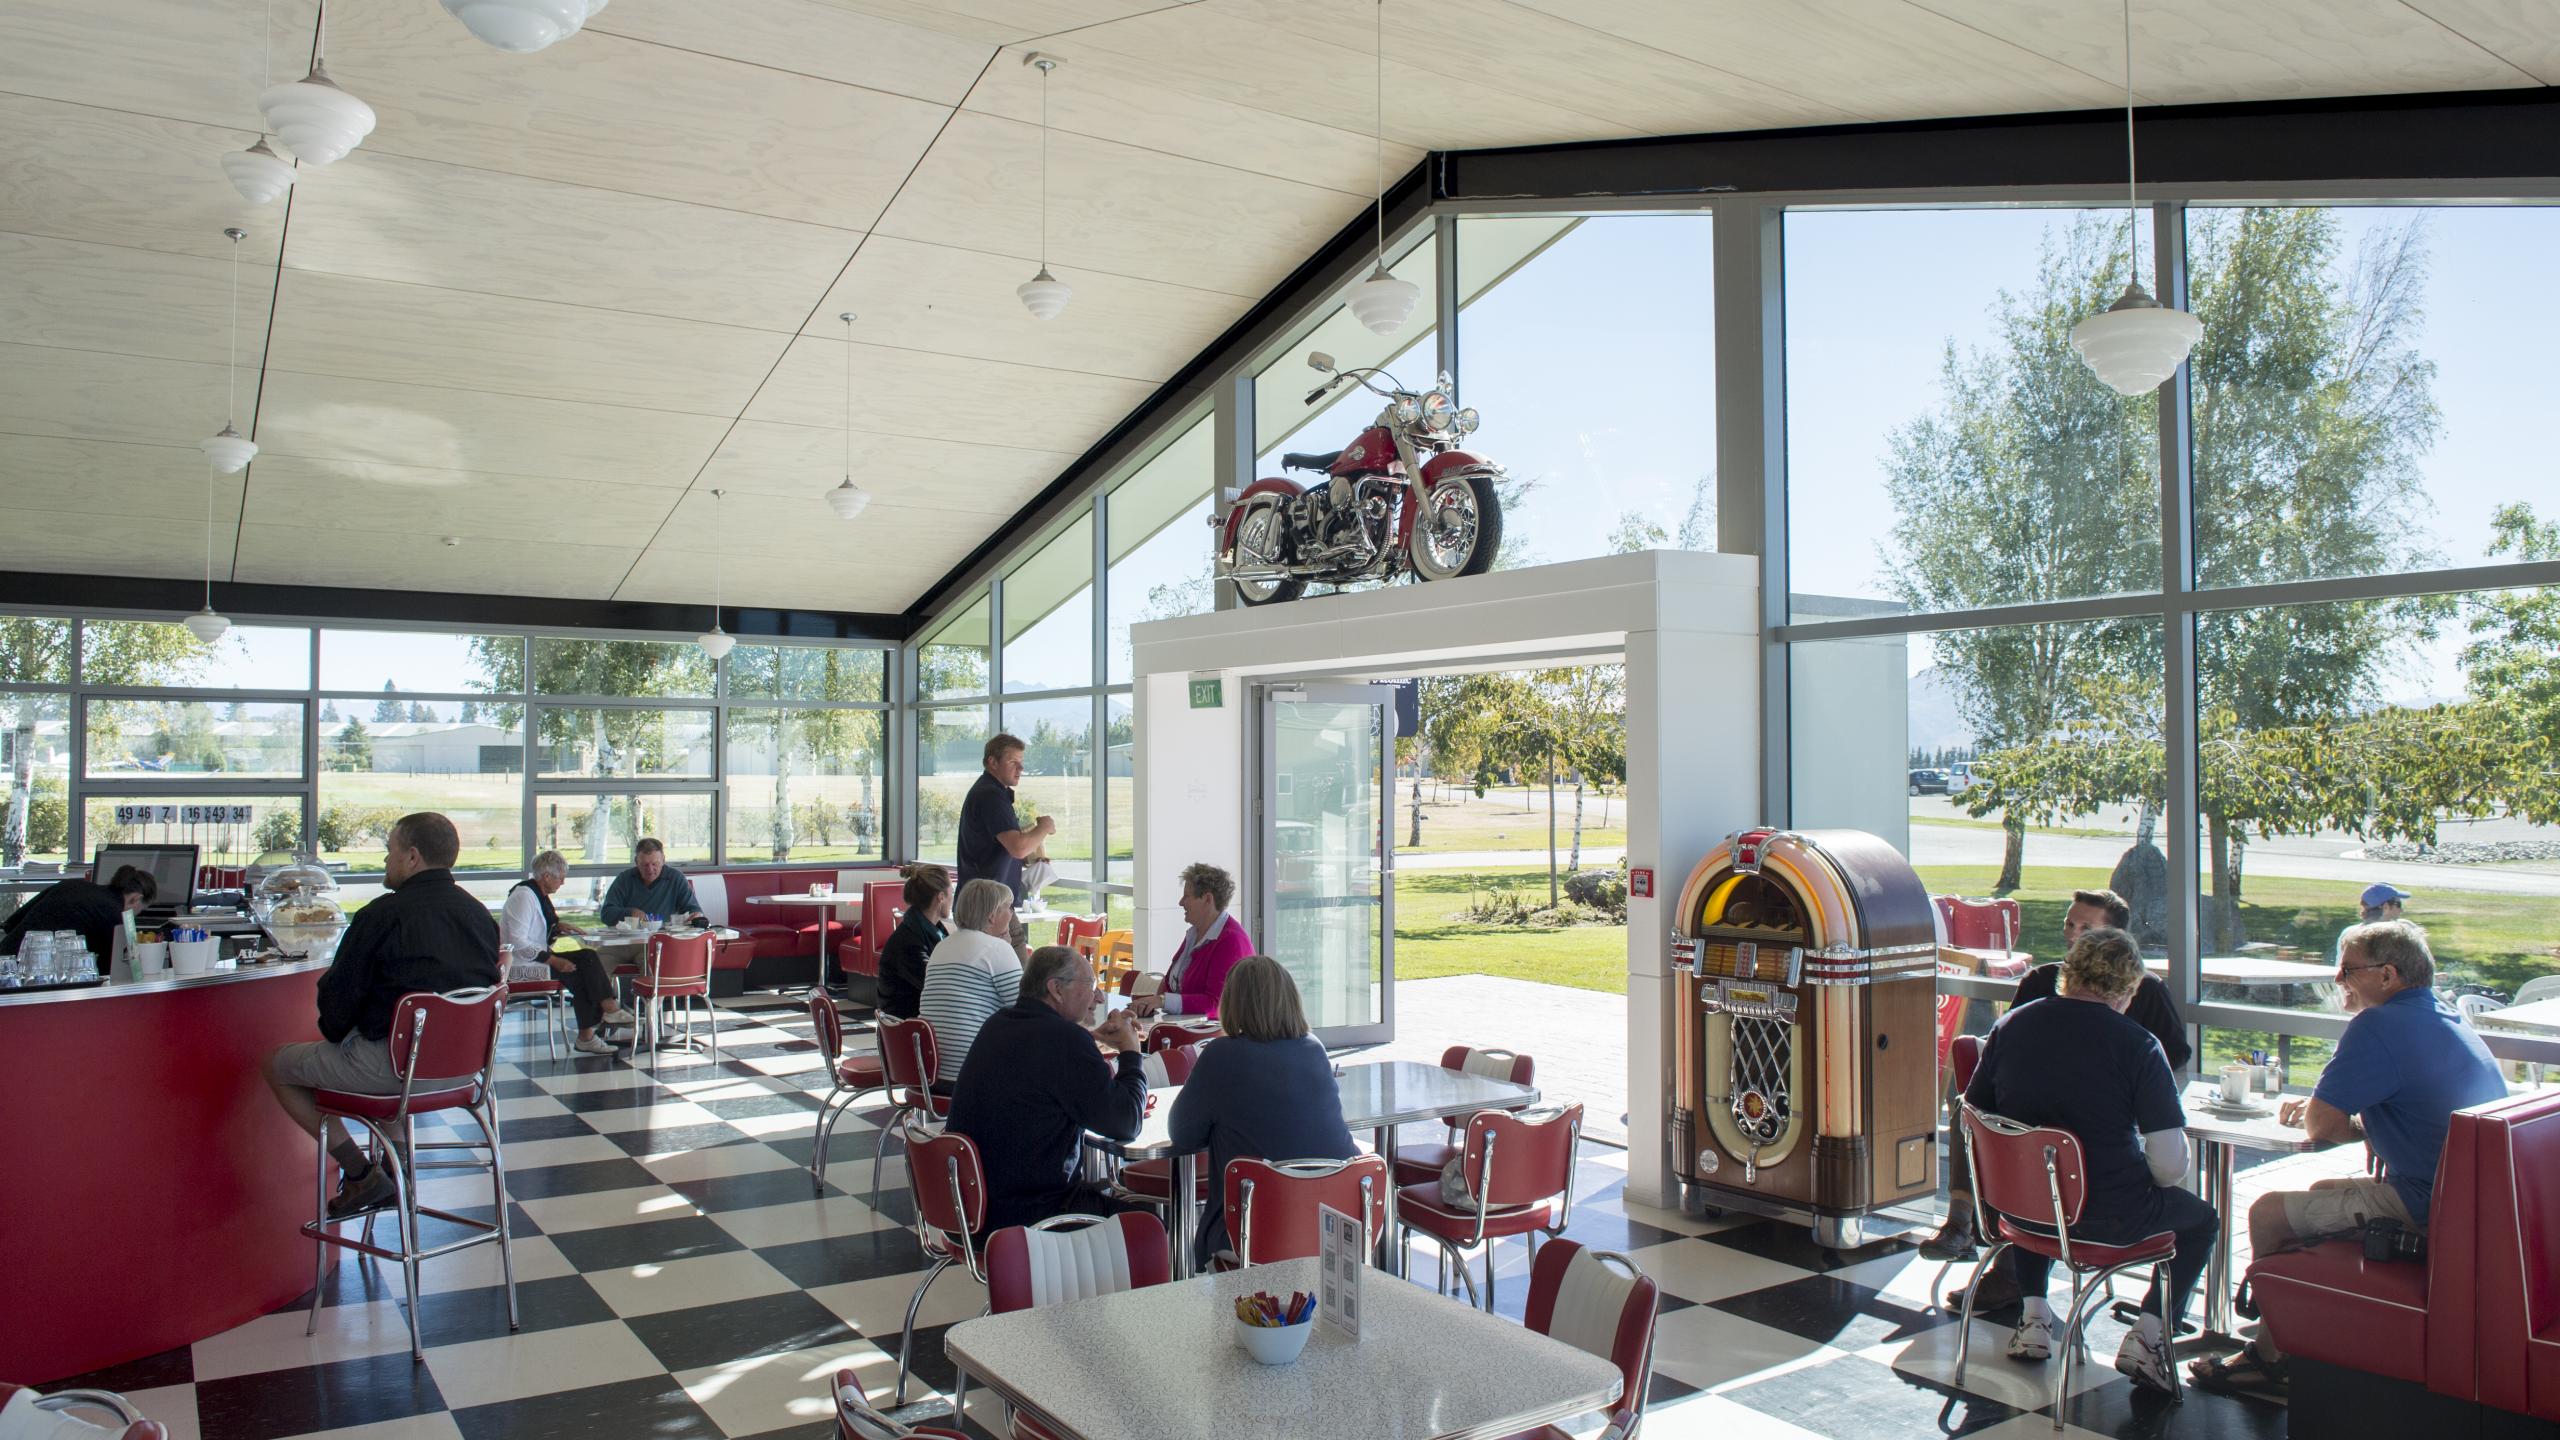 Warbirds Wheels 1950s Diner adds a fun dimension to an event